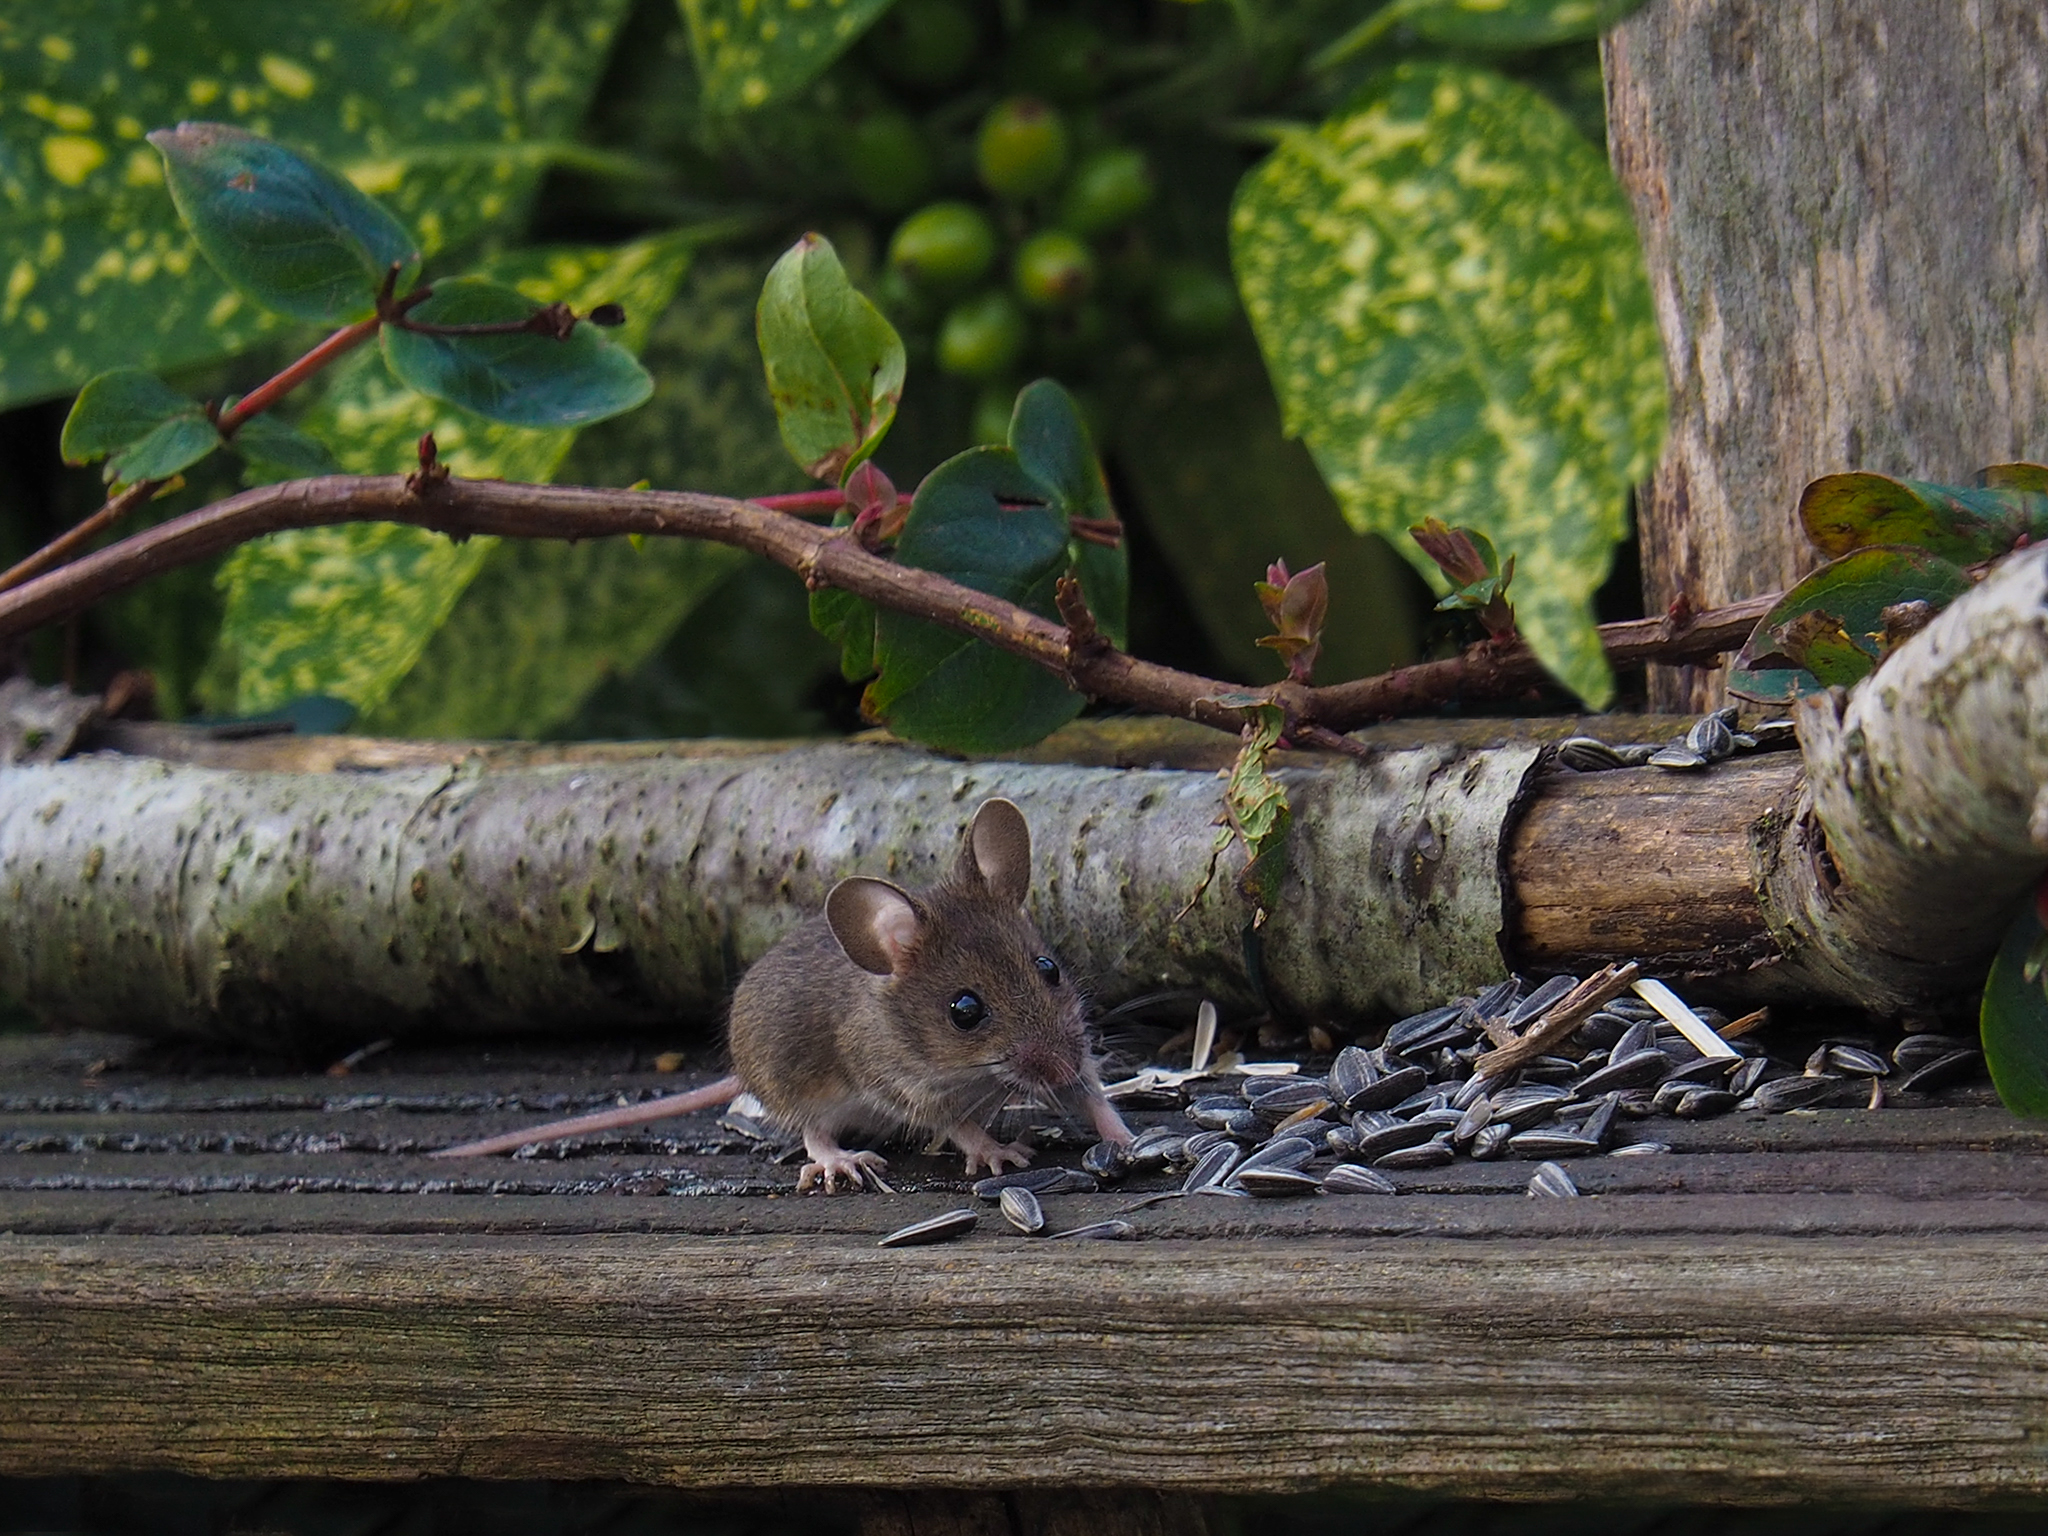 Mouse on the feeder